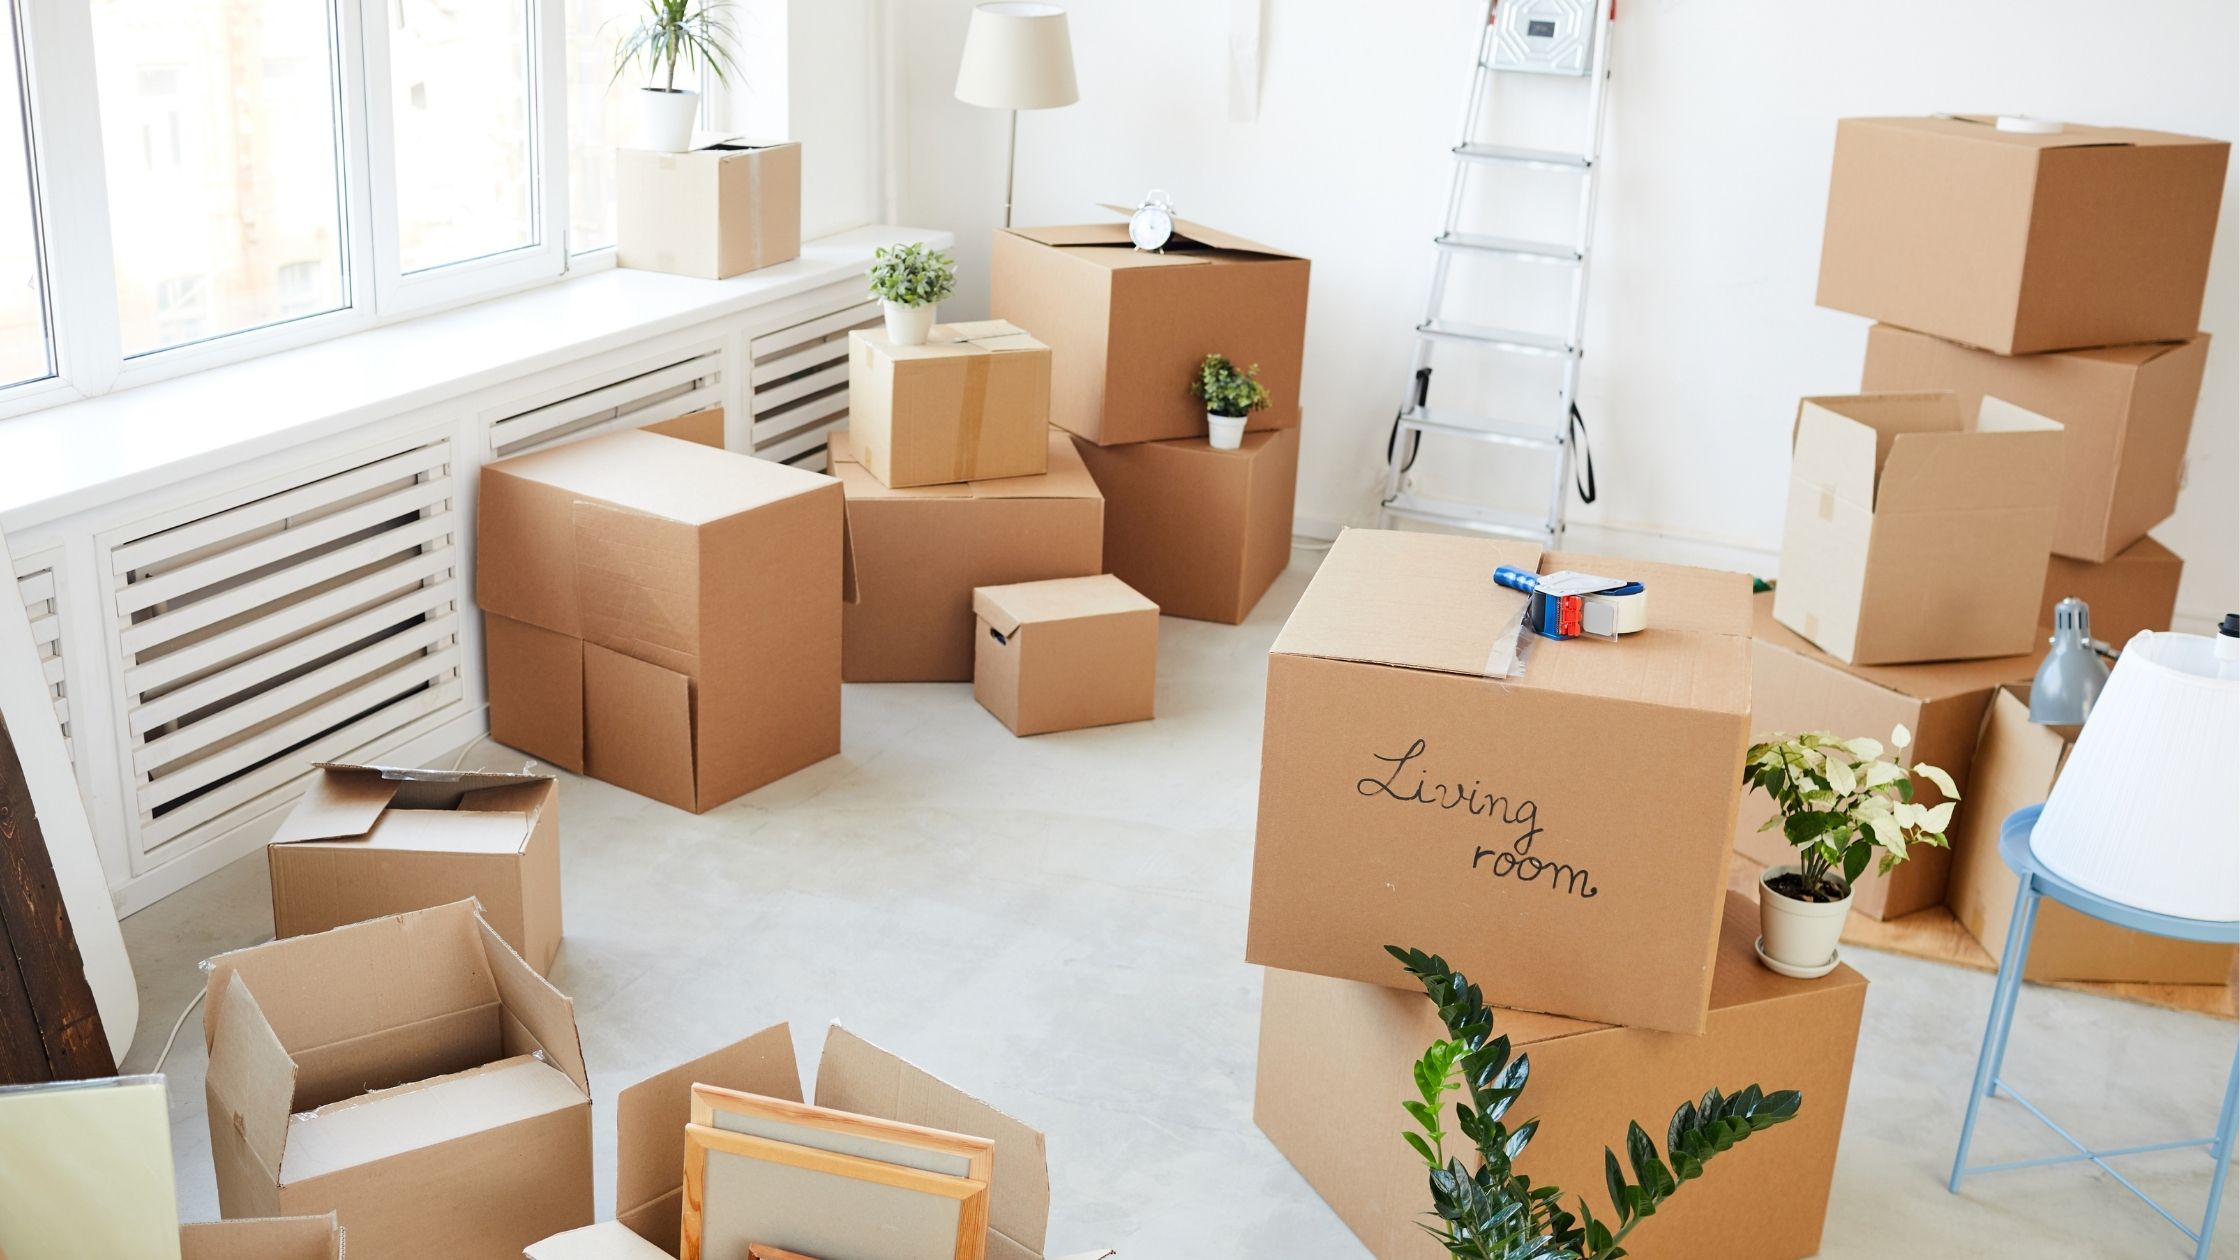 How to find motivation to declutter